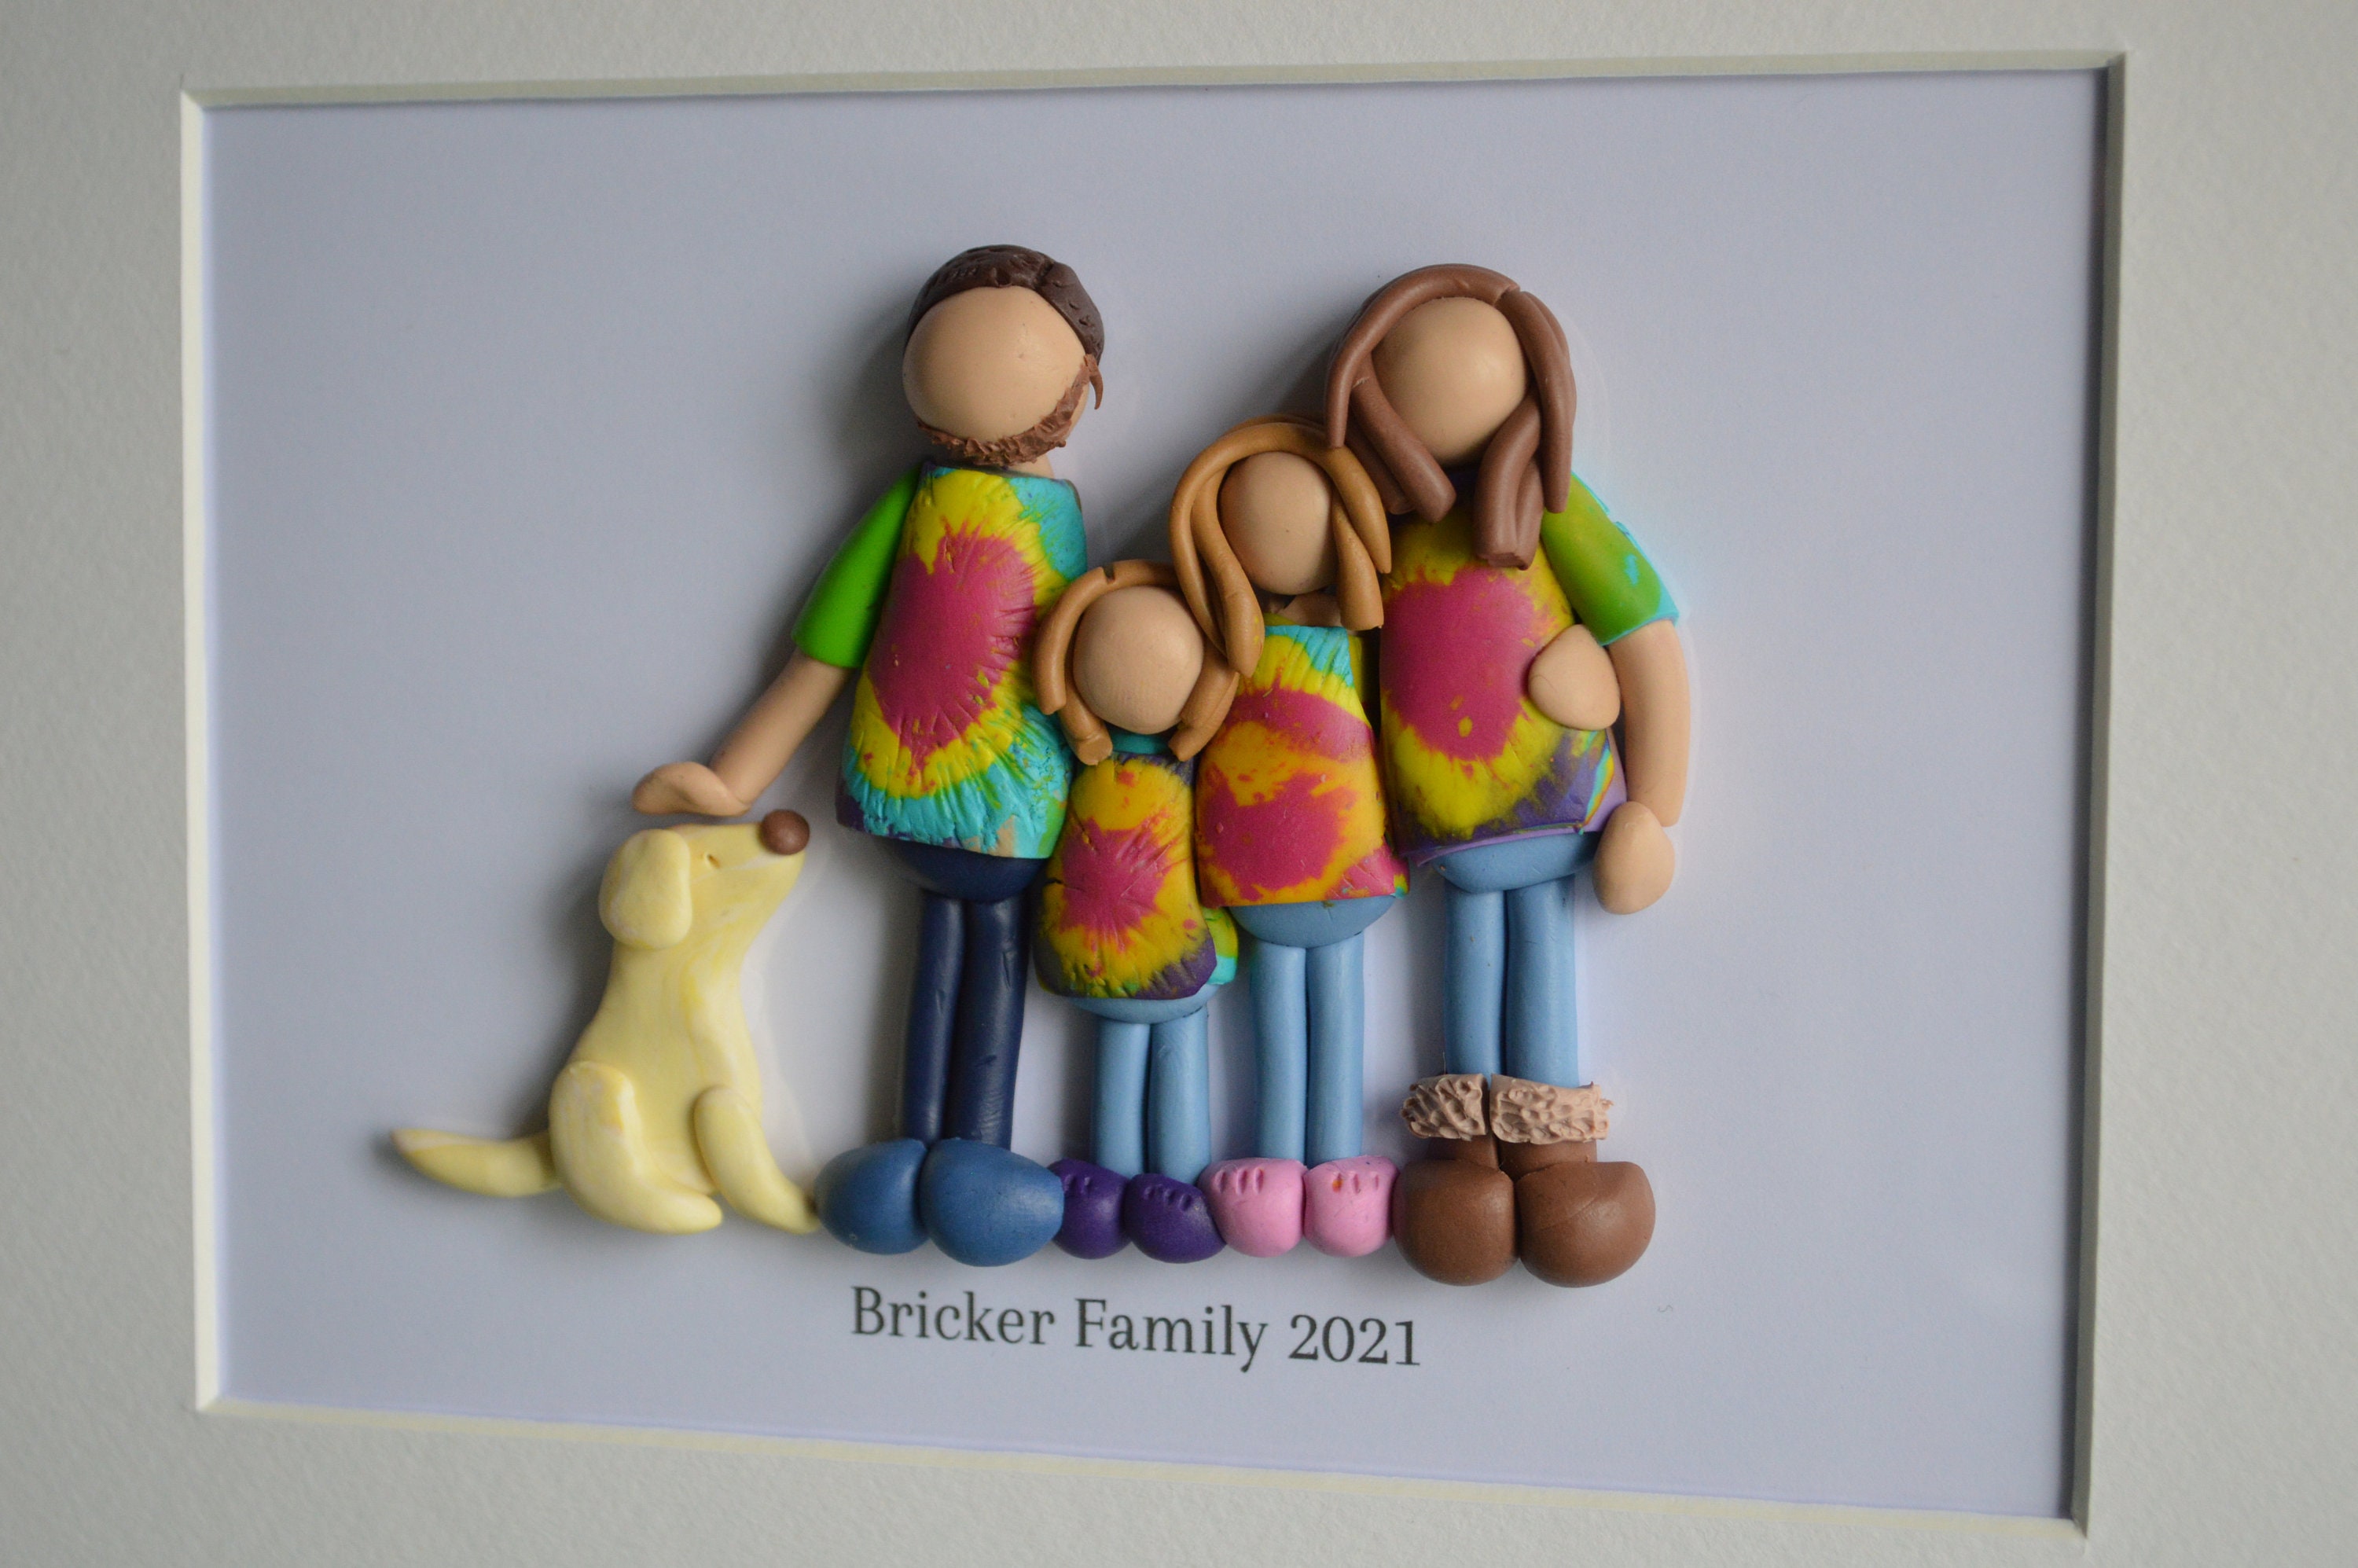 pets Handmade clay family framed portraits unique and personalised  sculpted by hand family wedding any occasion gift birthday friends